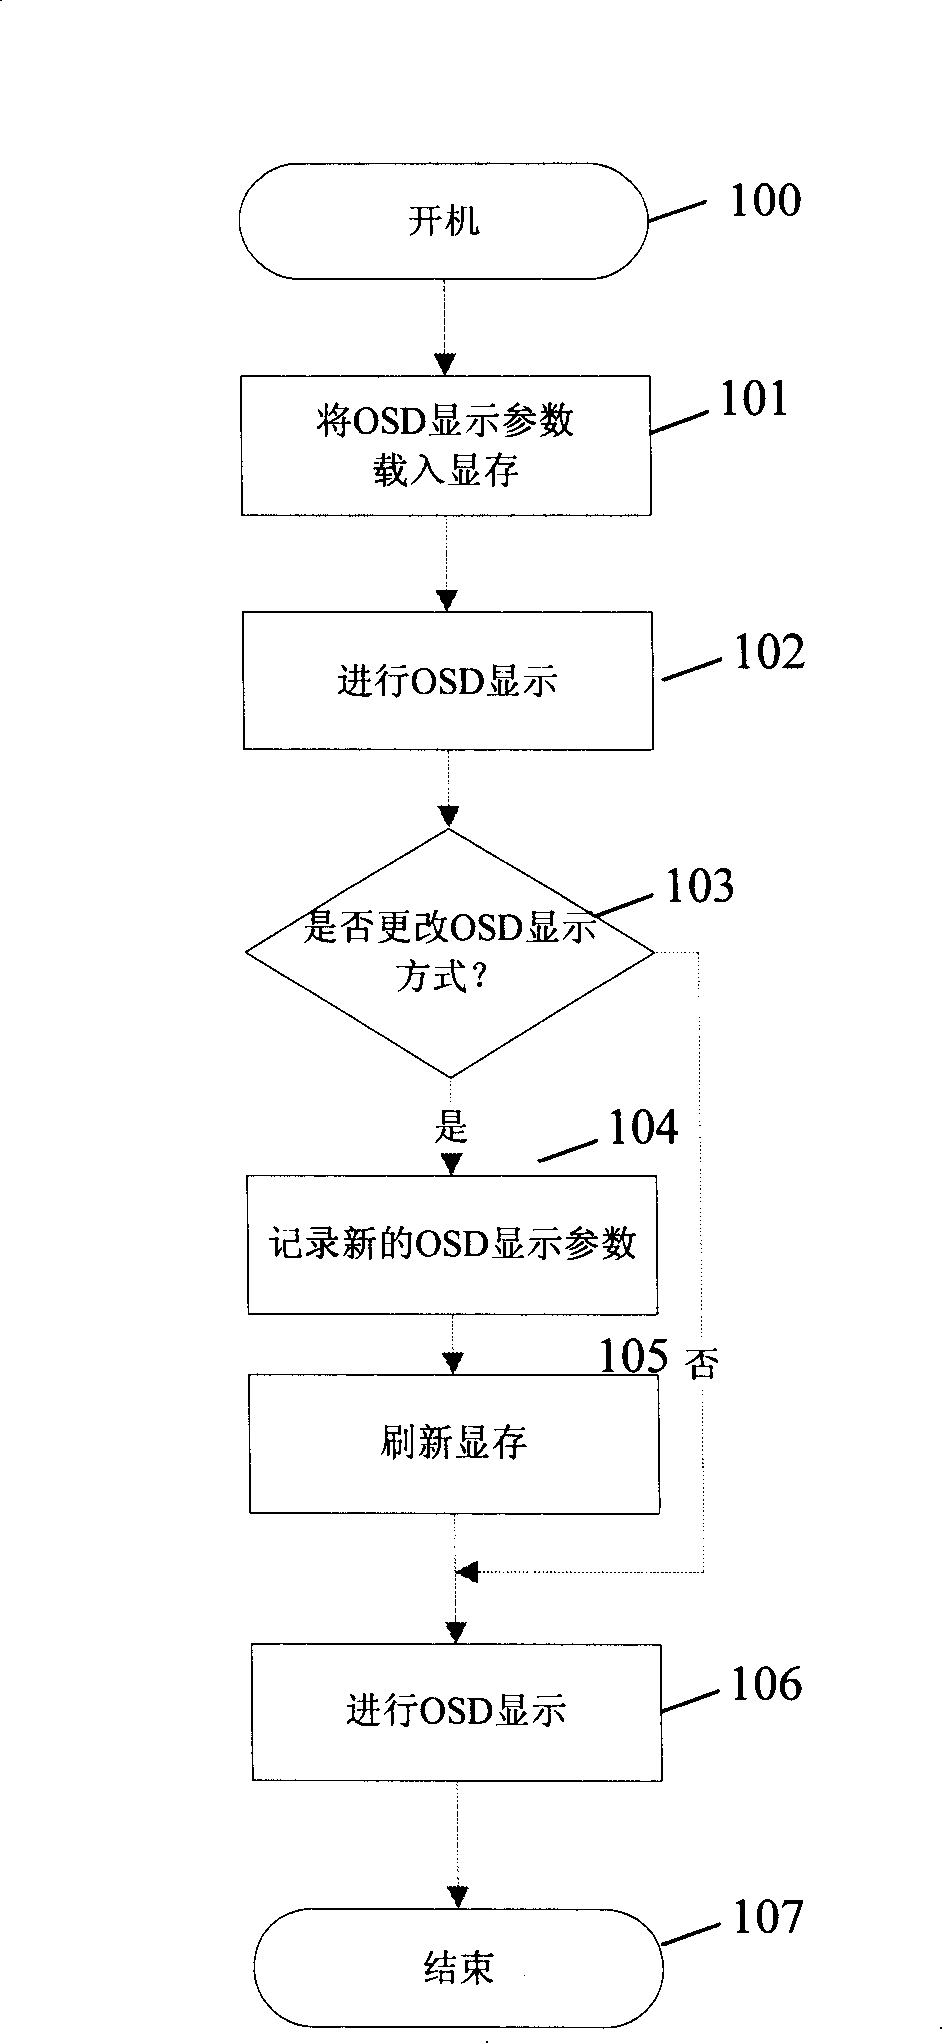 Method and device for controlling TV set menu interface